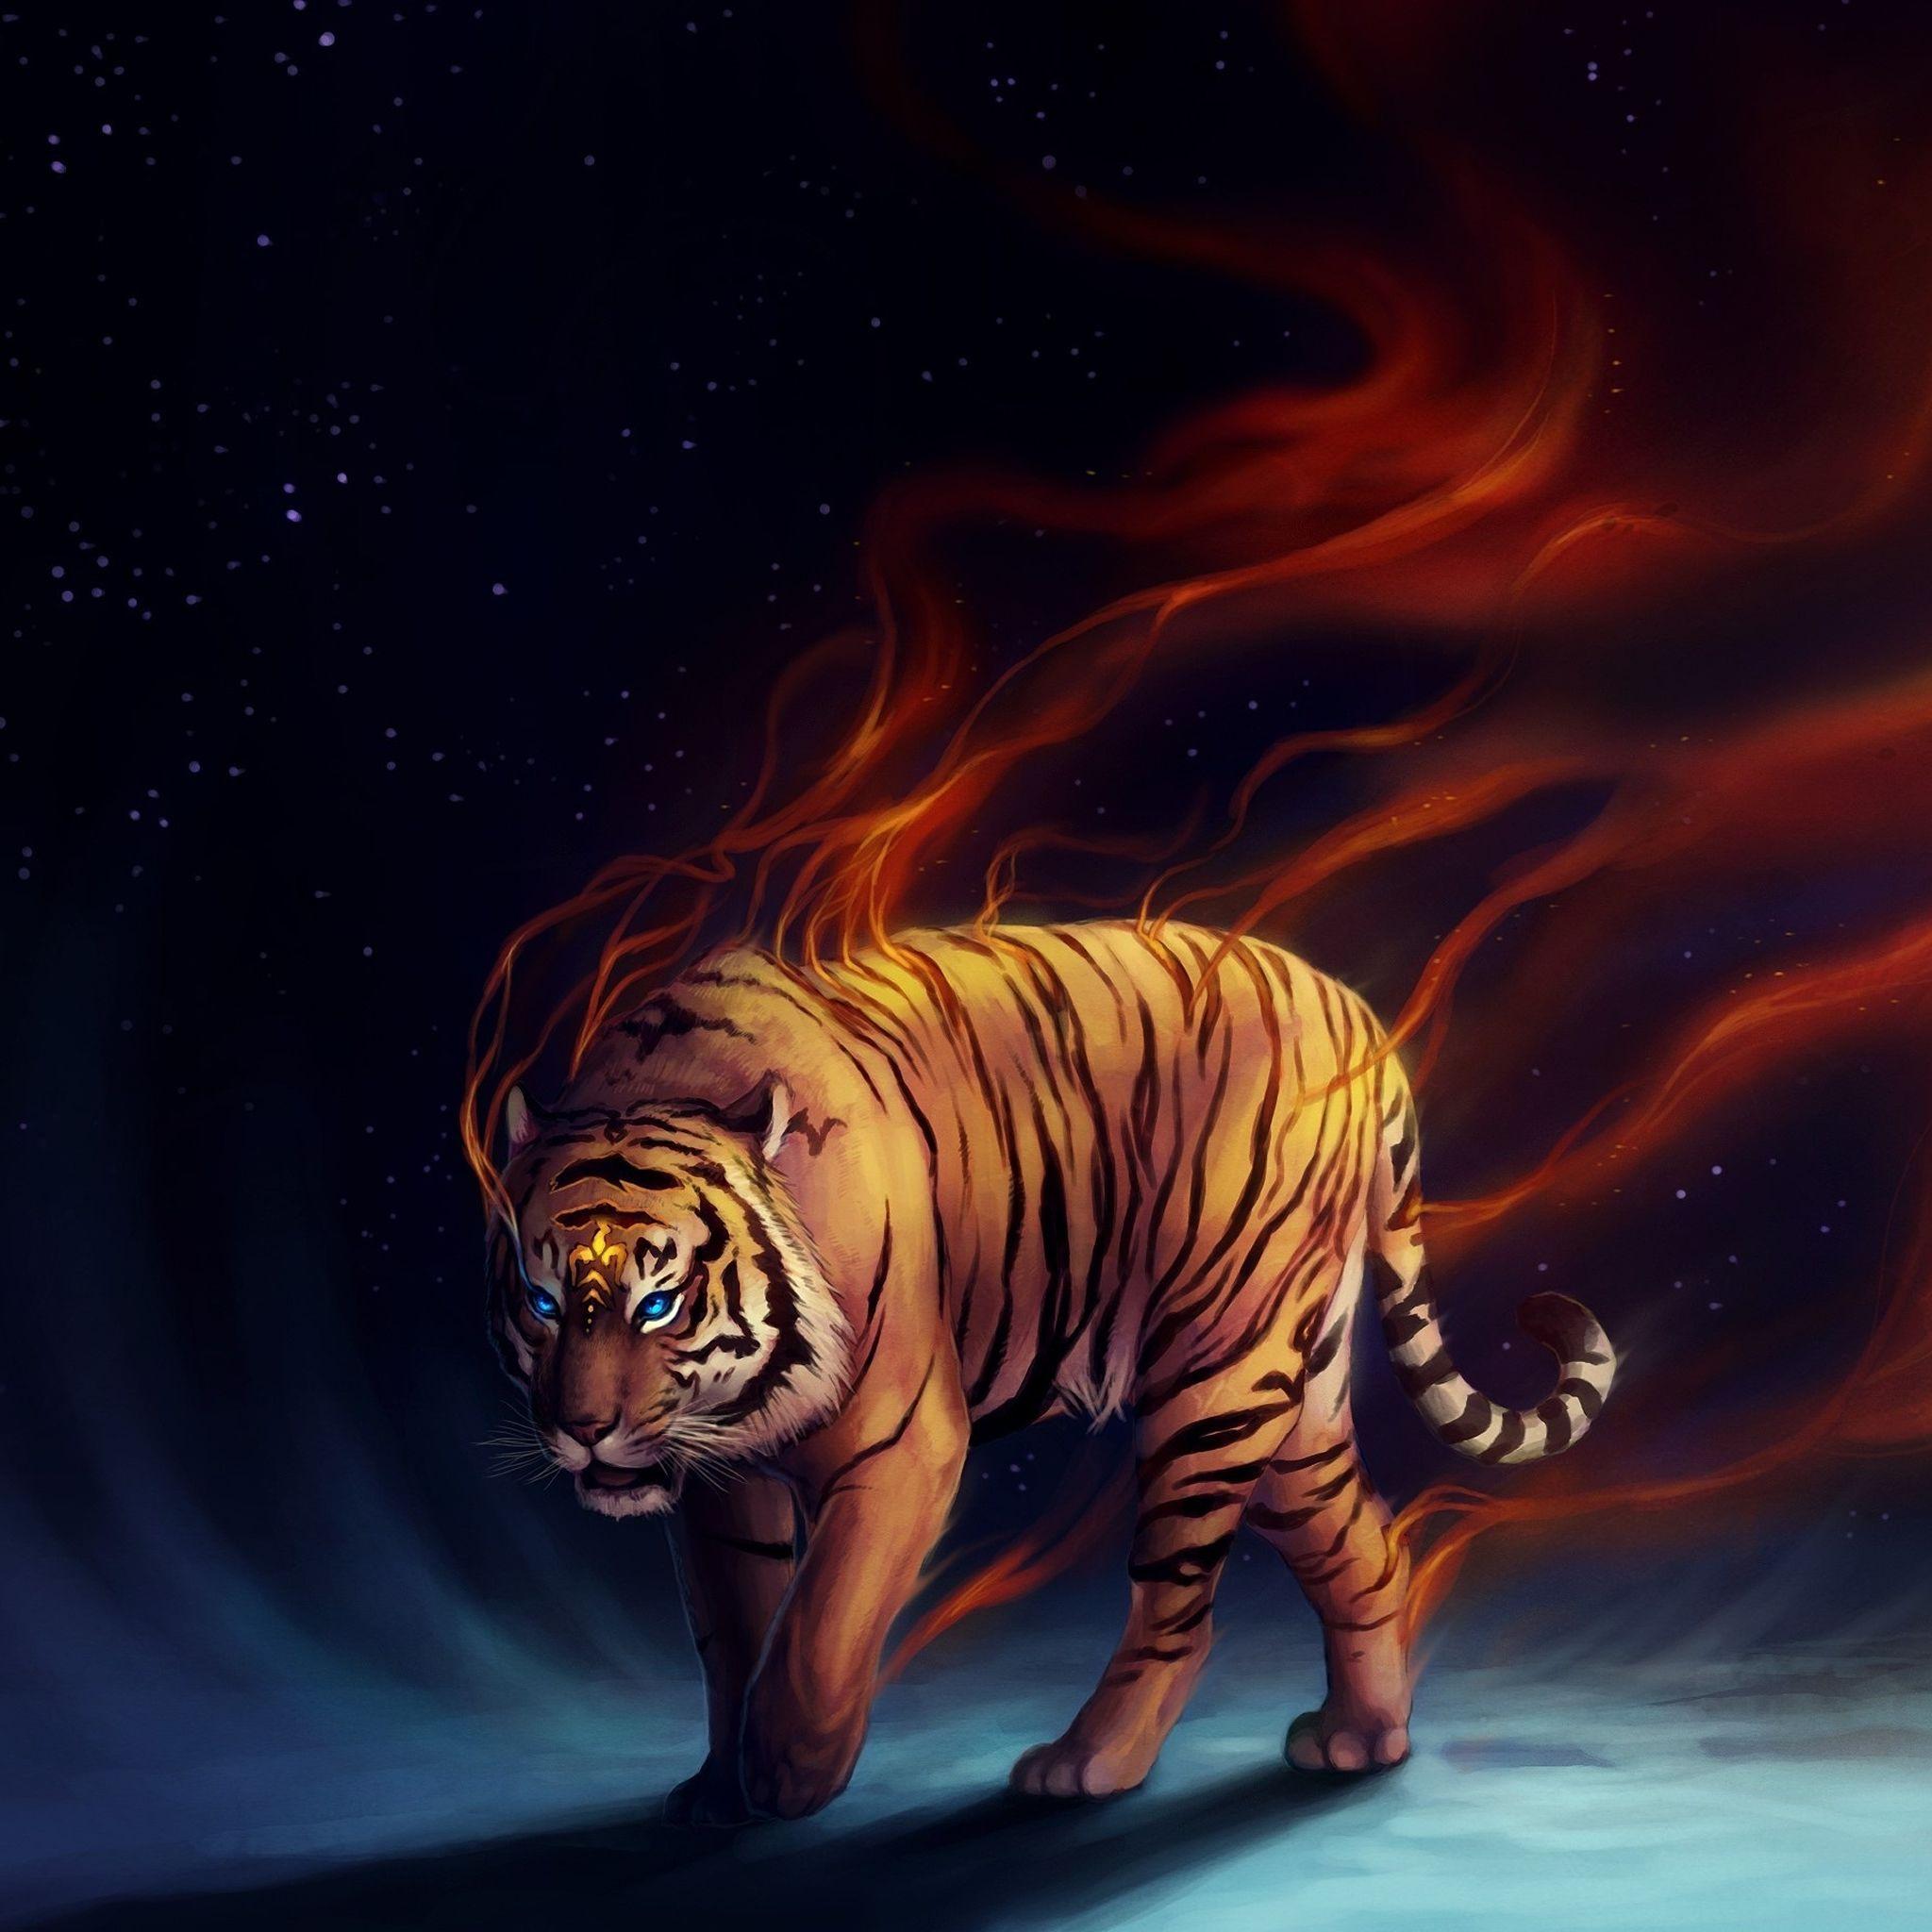 Free download the The Tiger wallpaper , beaty your iphone. #dark #monster #night d #fire #flames #tiger #Wall. Tiger art, Tiger wallpaper, Wild animal wallpaper